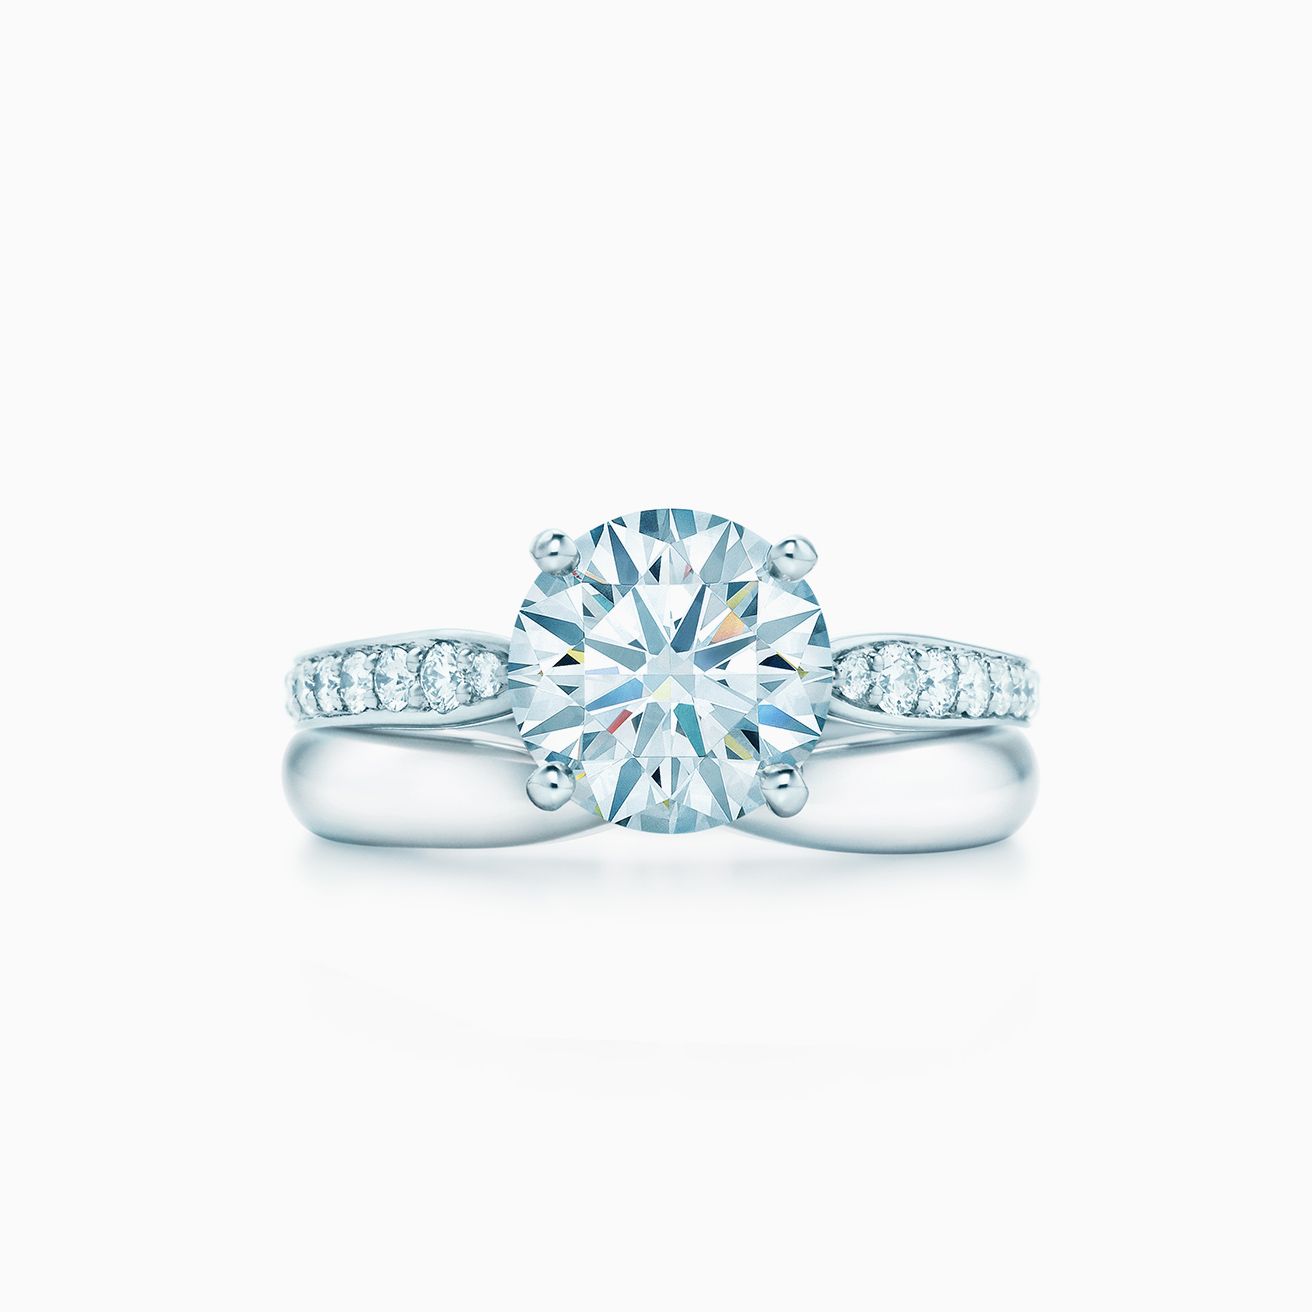  Tiffany  Harmony  engagement  ring  with a diamond band in 